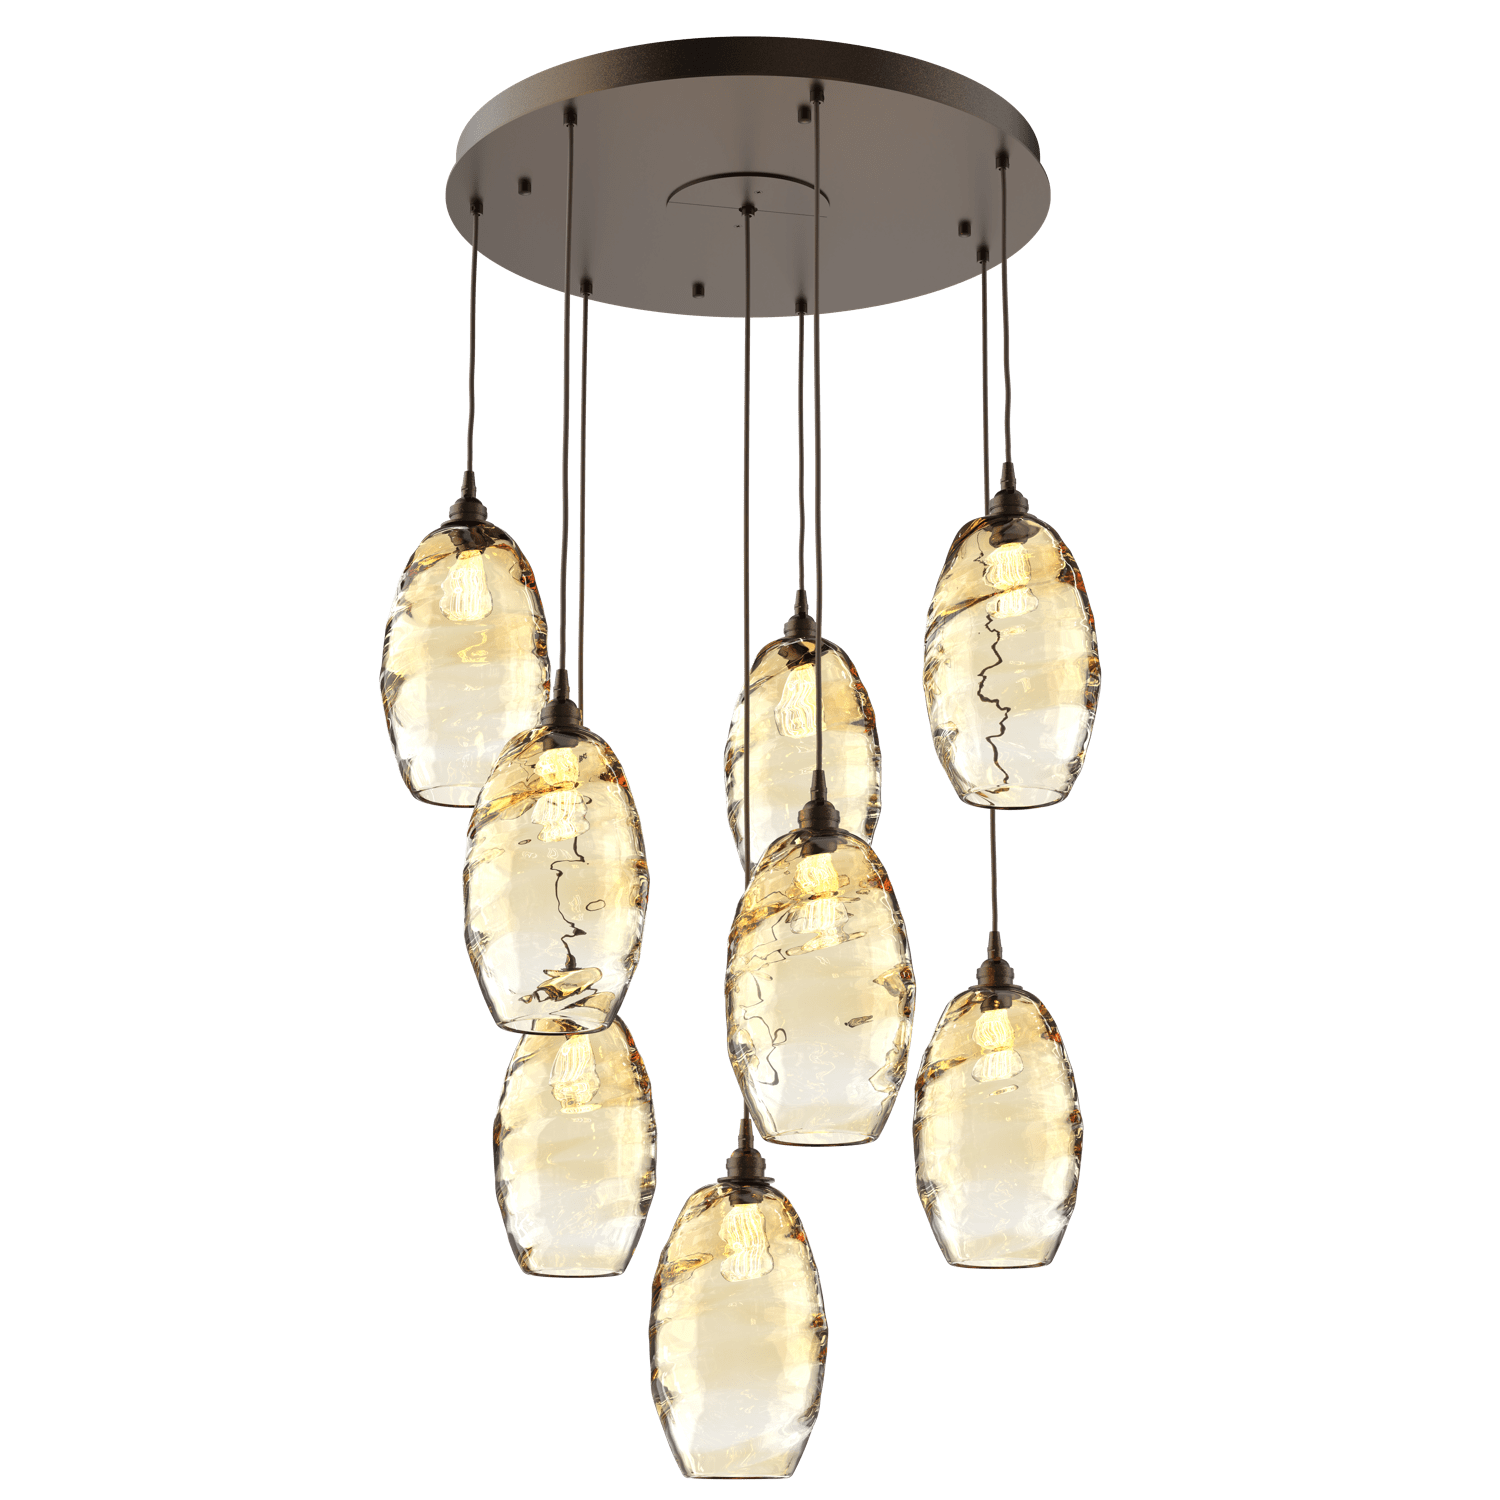 CHB0035-08-FB-OA-Hammerton-Studio-Optic-Blown-Glass-Elisse-8-light-round-pendant-chandelier-with-flat-bronze-finish-and-optic-amber-blown-glass-shades-and-incandescent-lamping